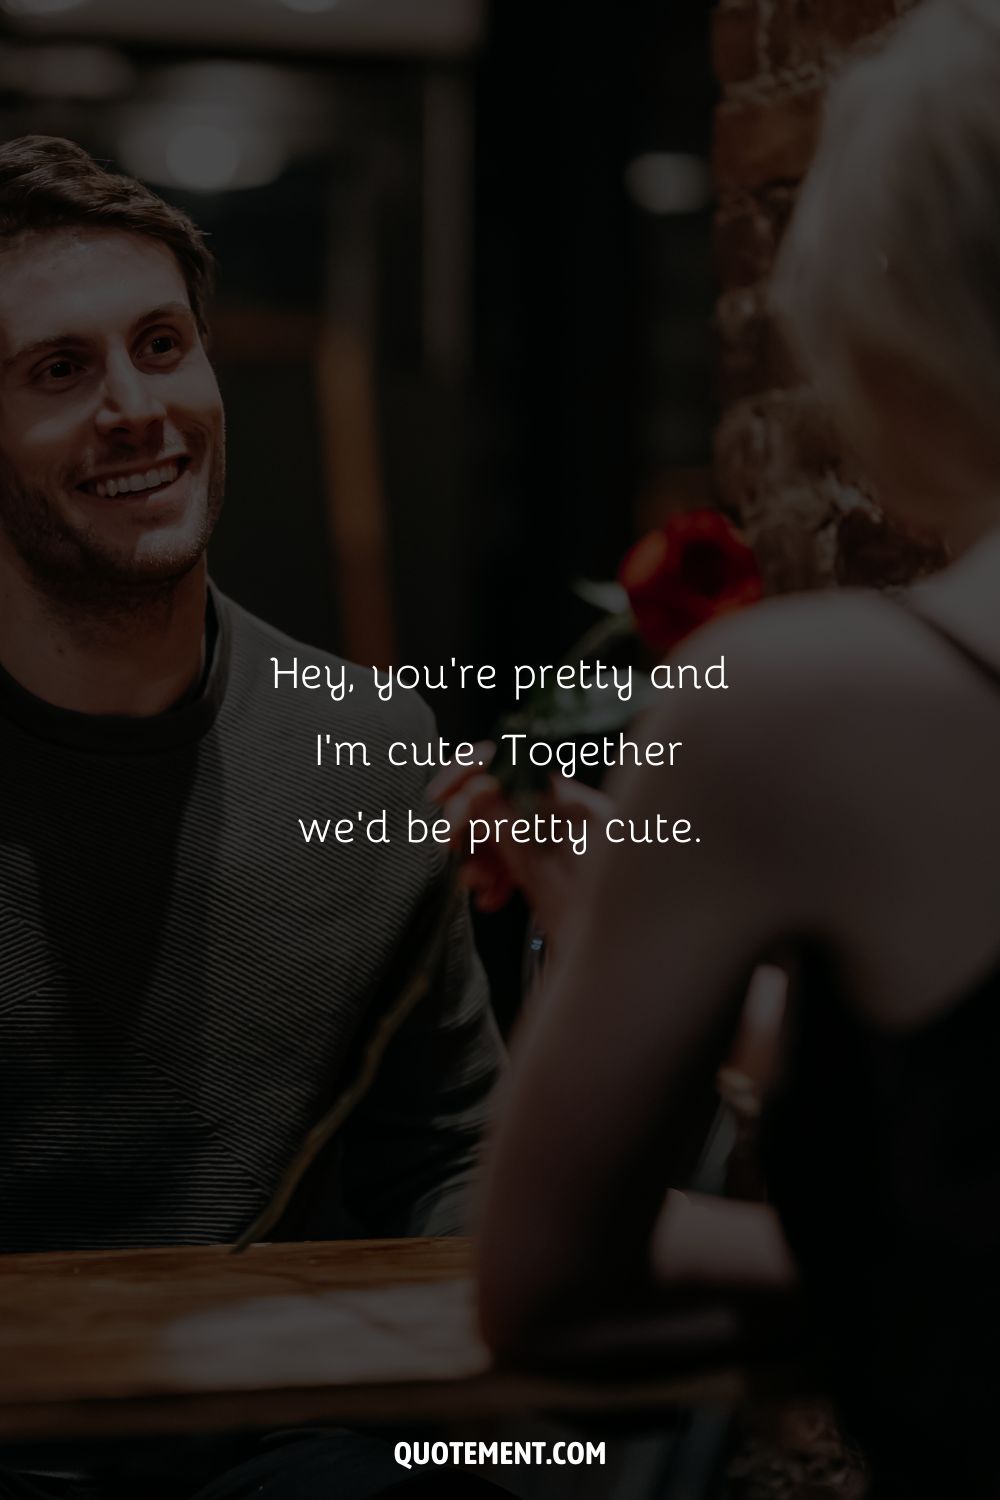 Hey, you’re pretty and I’m cute. Together we’d be pretty cute.